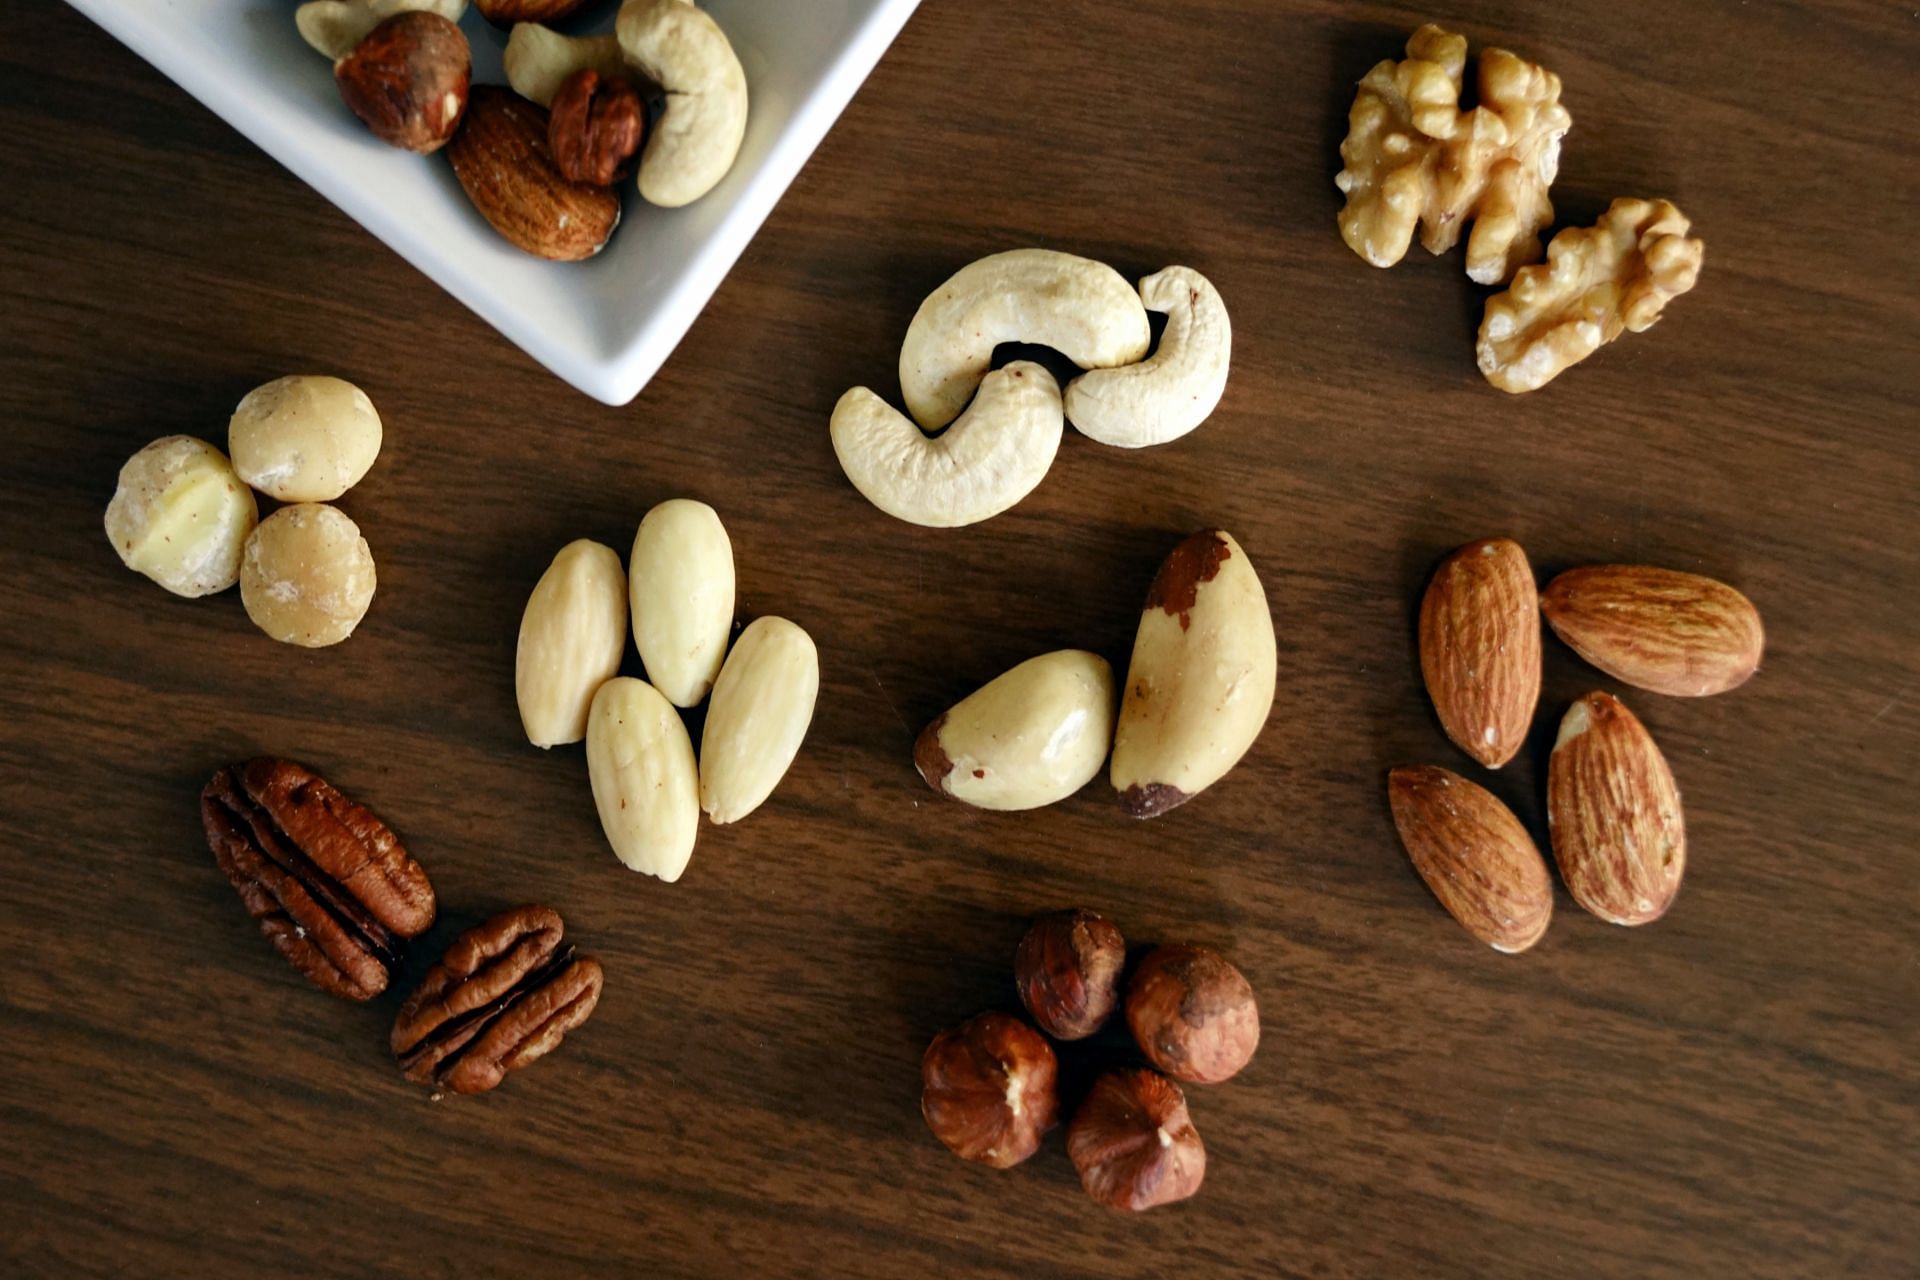 Nuts foods that help elasticity in skin (image sourced via Pexels / Photo by marta)